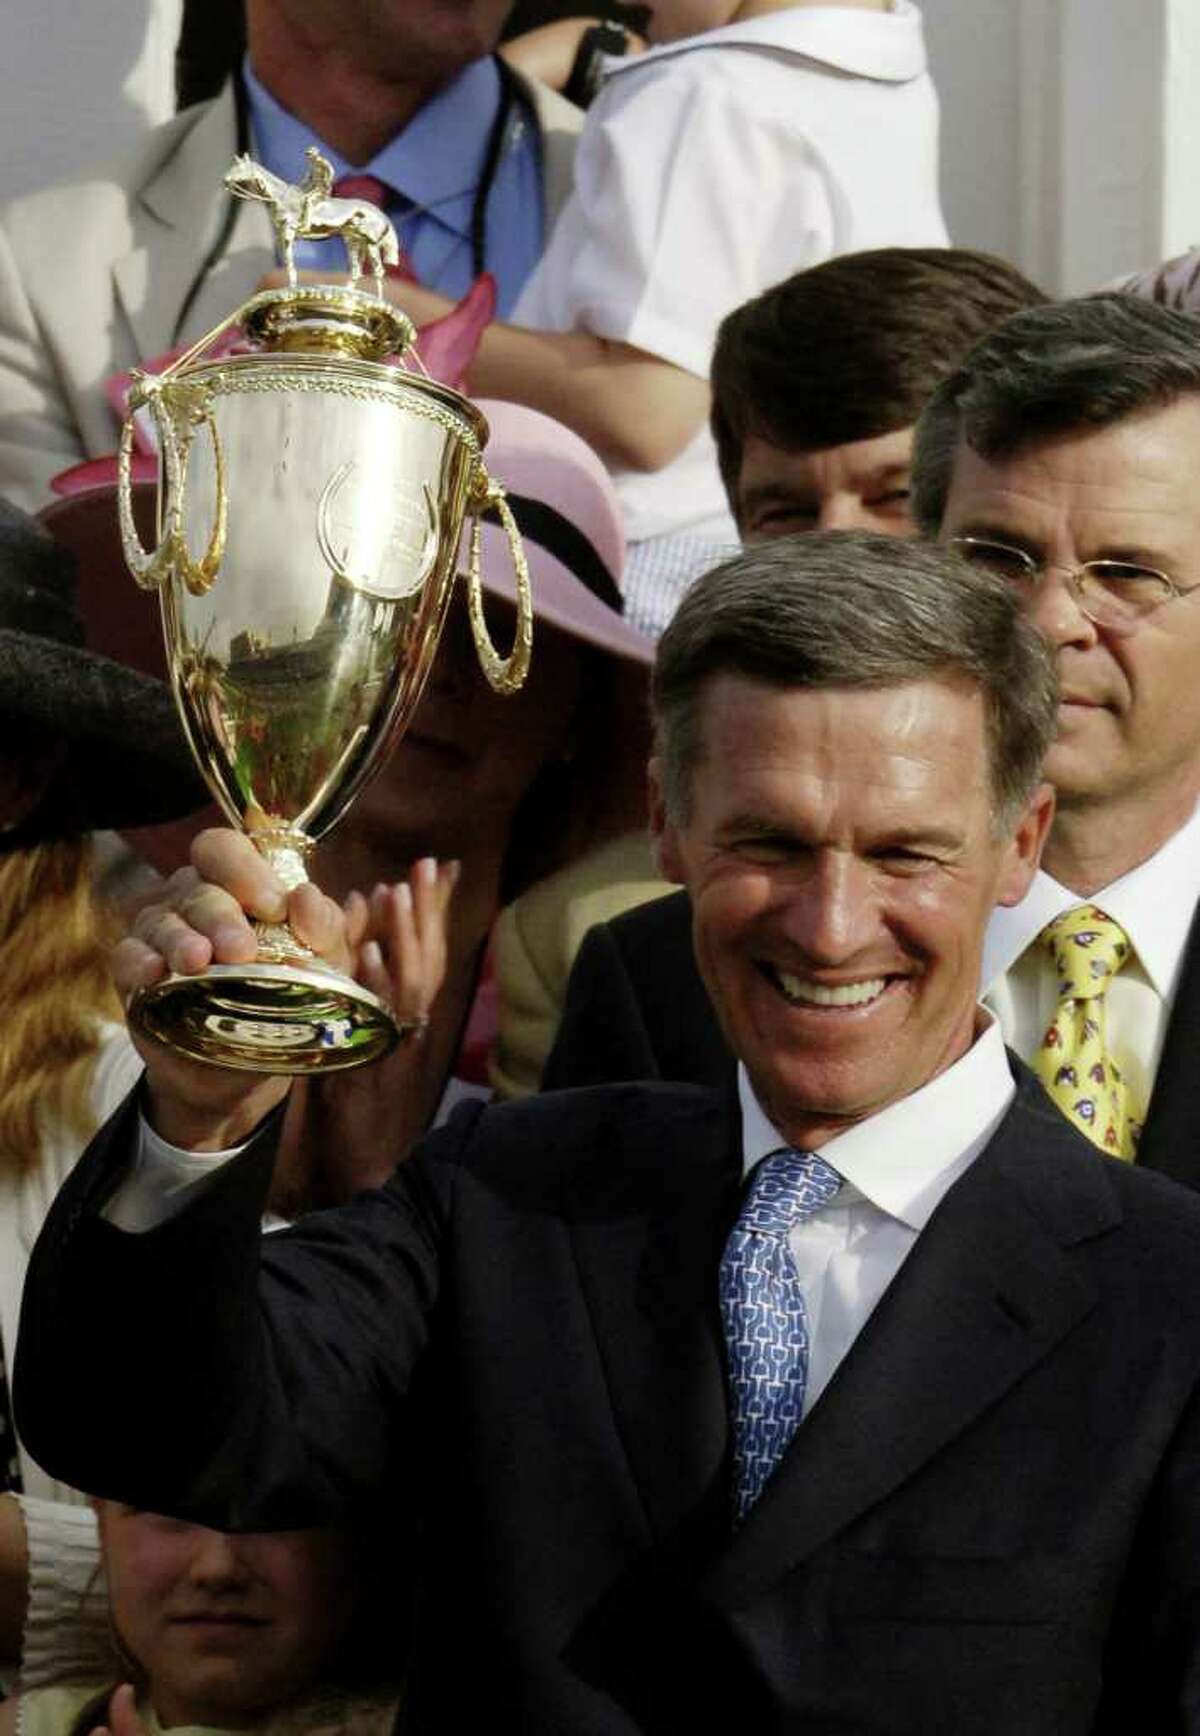 TIMES UNION STAFF PHOTO BY SKIP DICKSTEIN - Trainer Michael Matz holds the winner's trophy aloft after his trainee, Barbaro with jockey Edgar Prado won the 132nd Running of the Kentucky Derby at Churchill Downs in Louisville, Kentucky.